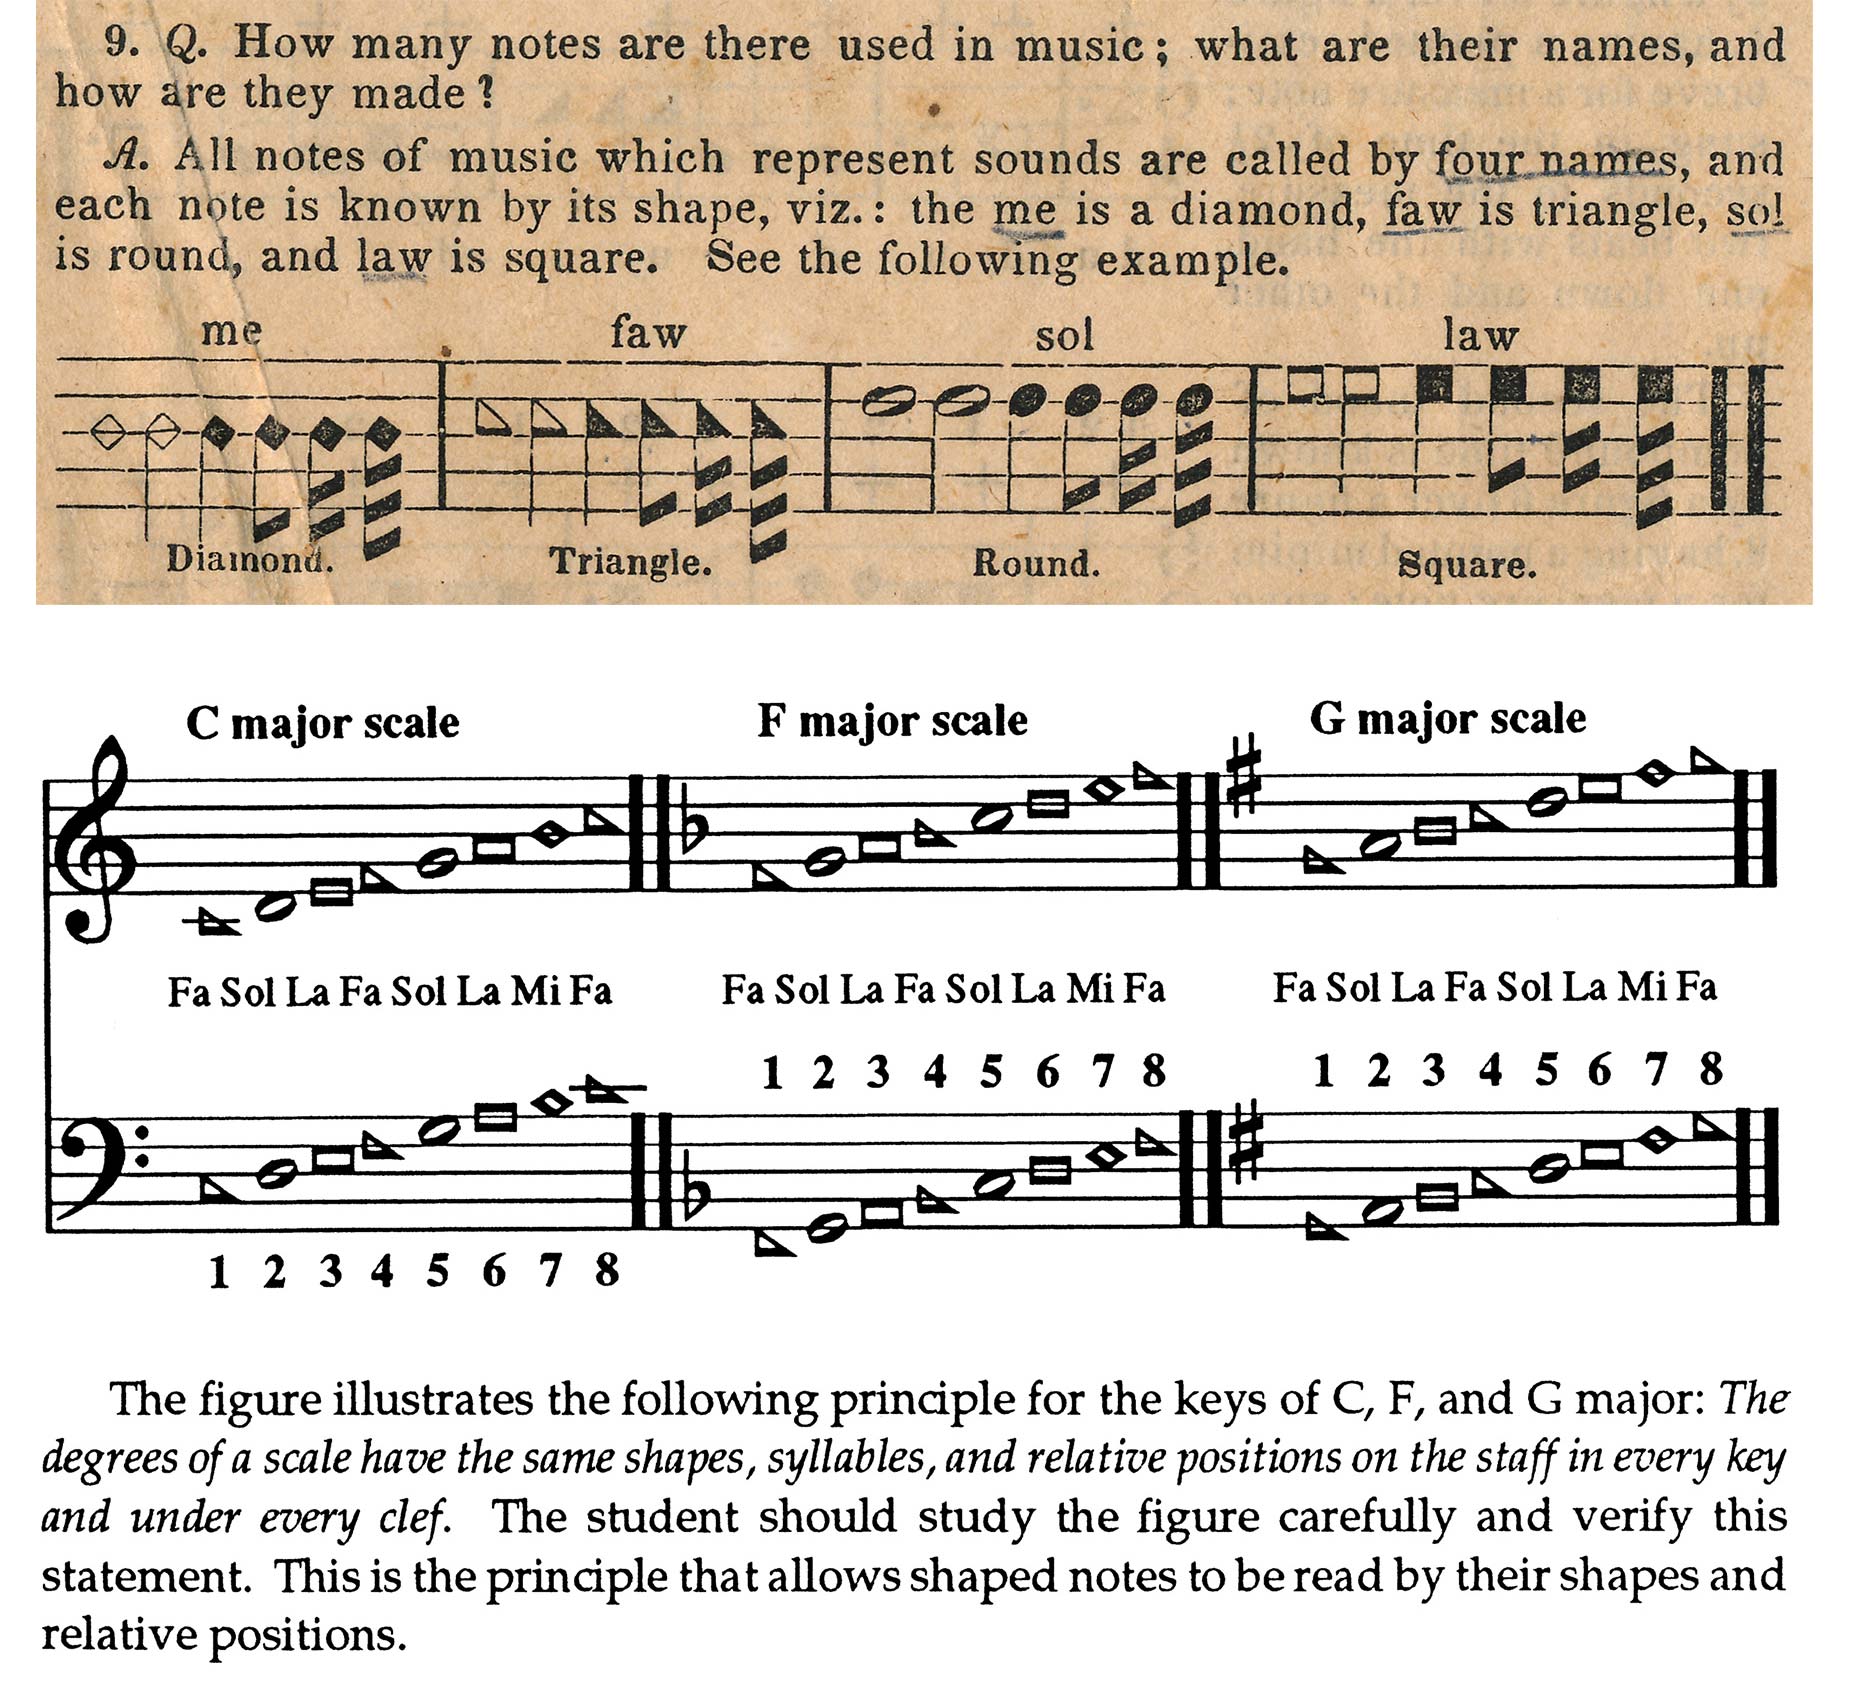 Shape-notes and the major scale from the rudiments of music of The Sacred Harp, Fourth Edition, 1870